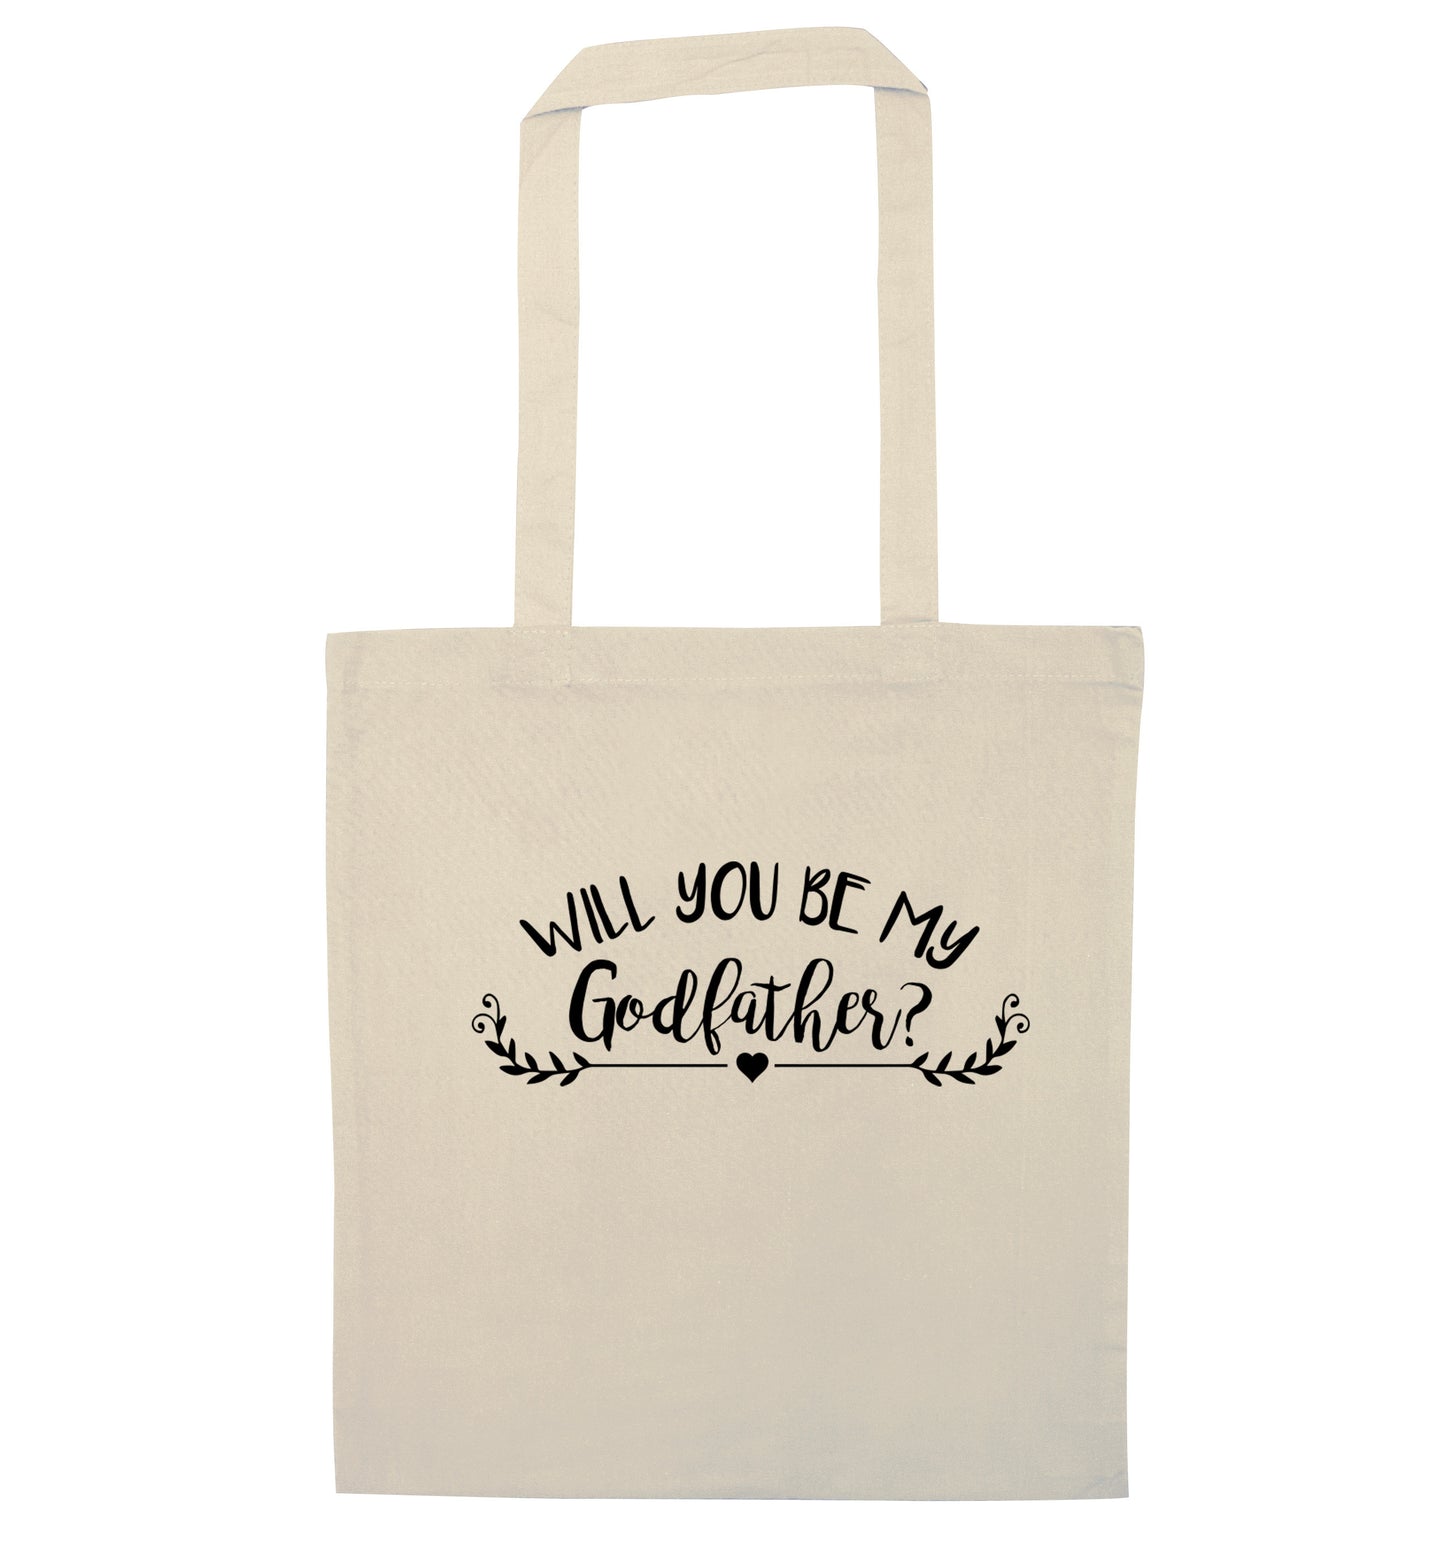 Will you be my godfather? natural tote bag